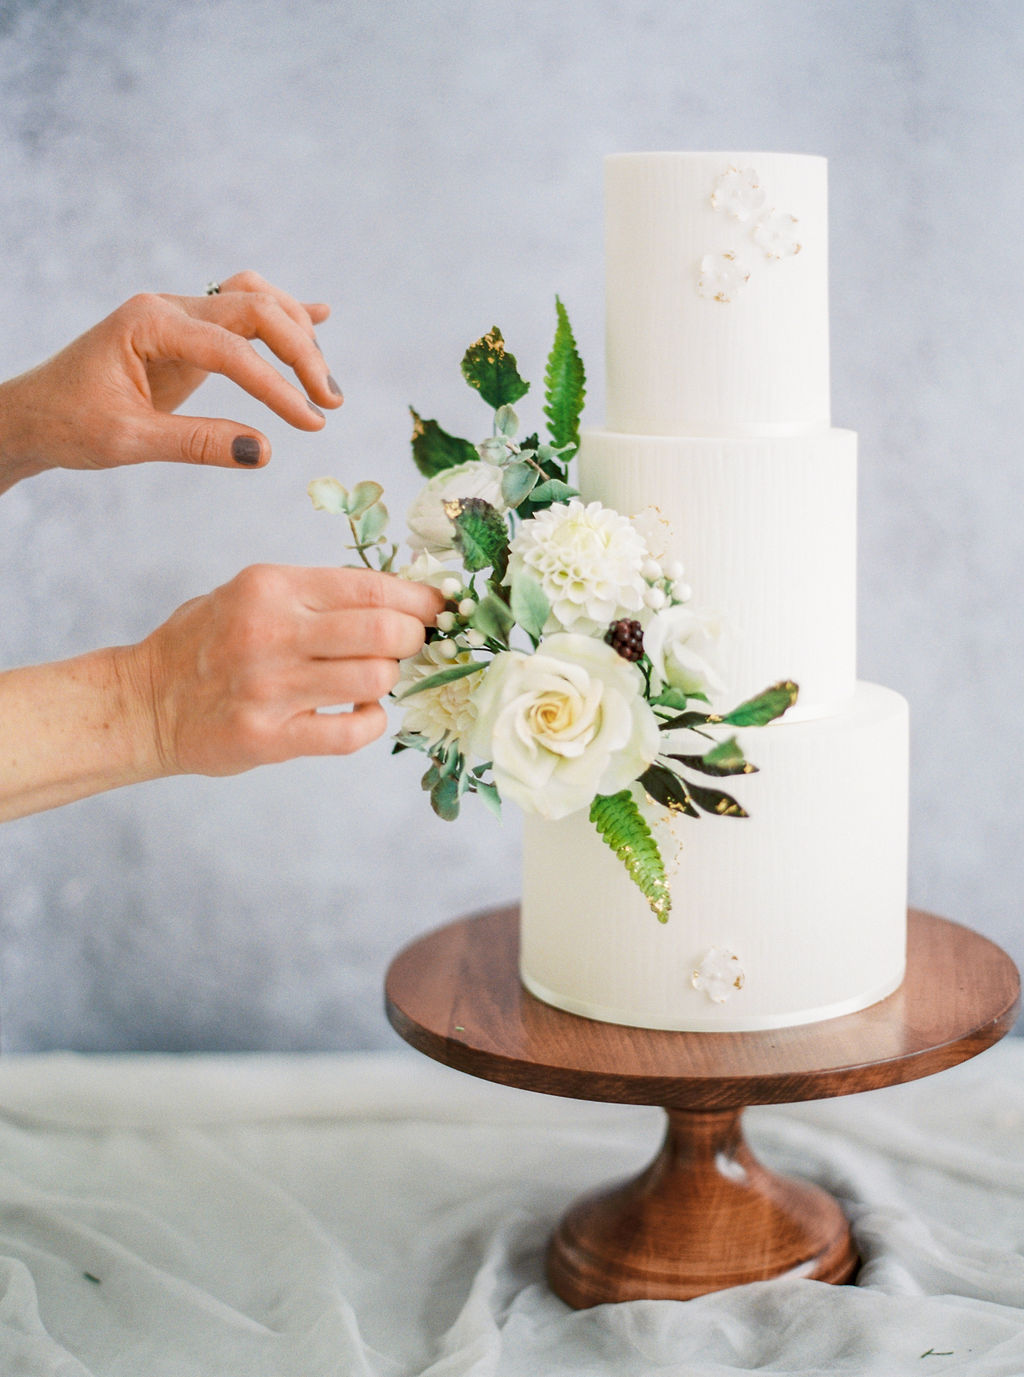 How to Decorate a Cake with Flowers - Emily Laurae